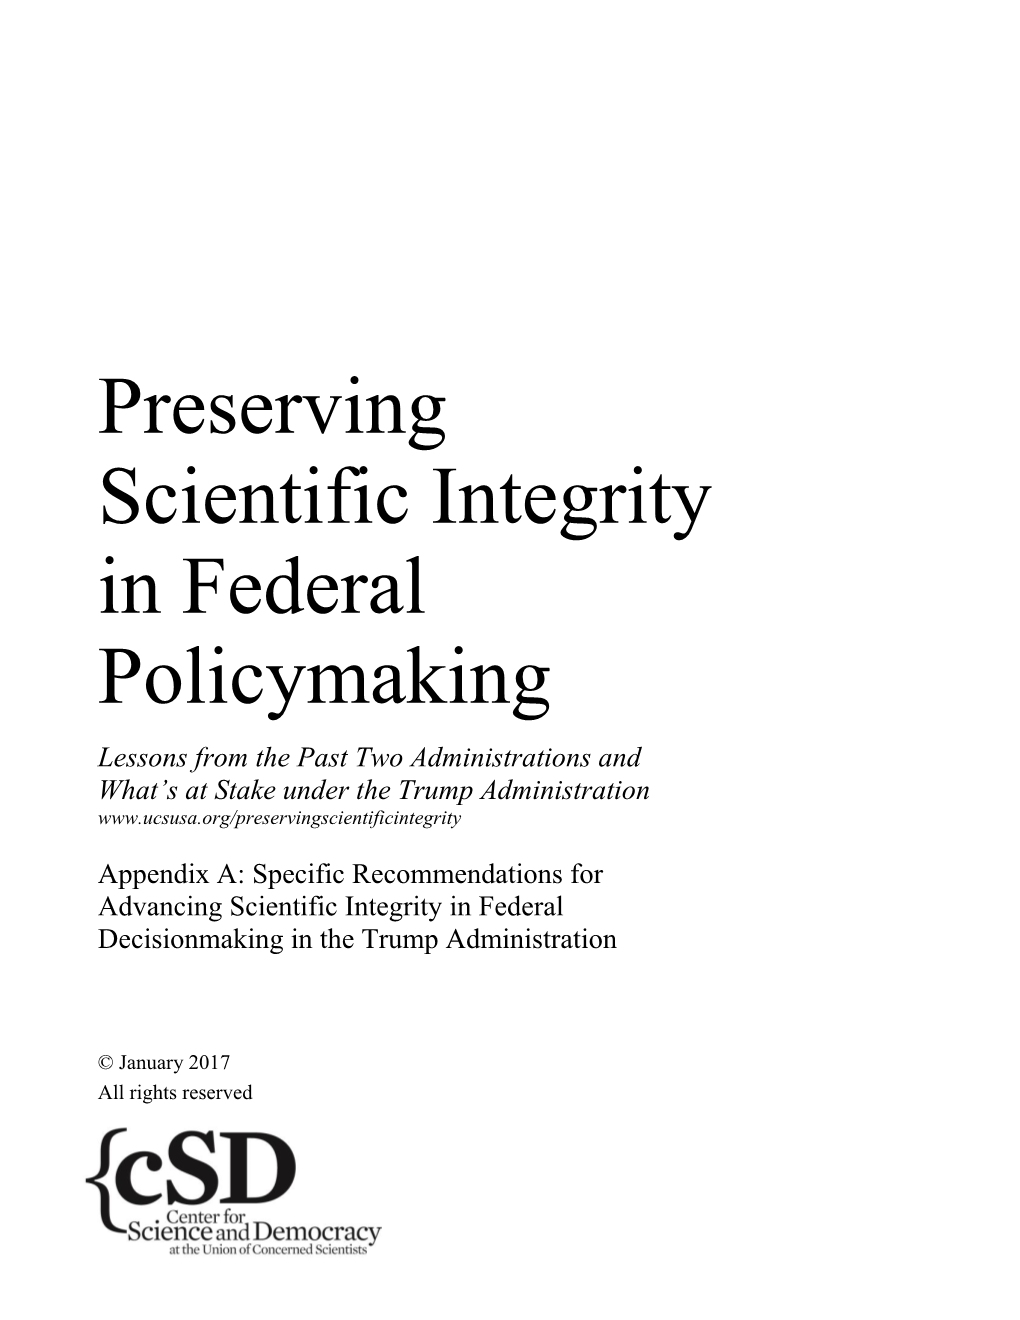 Preserving Scientific Integrity in Federal Policymaking